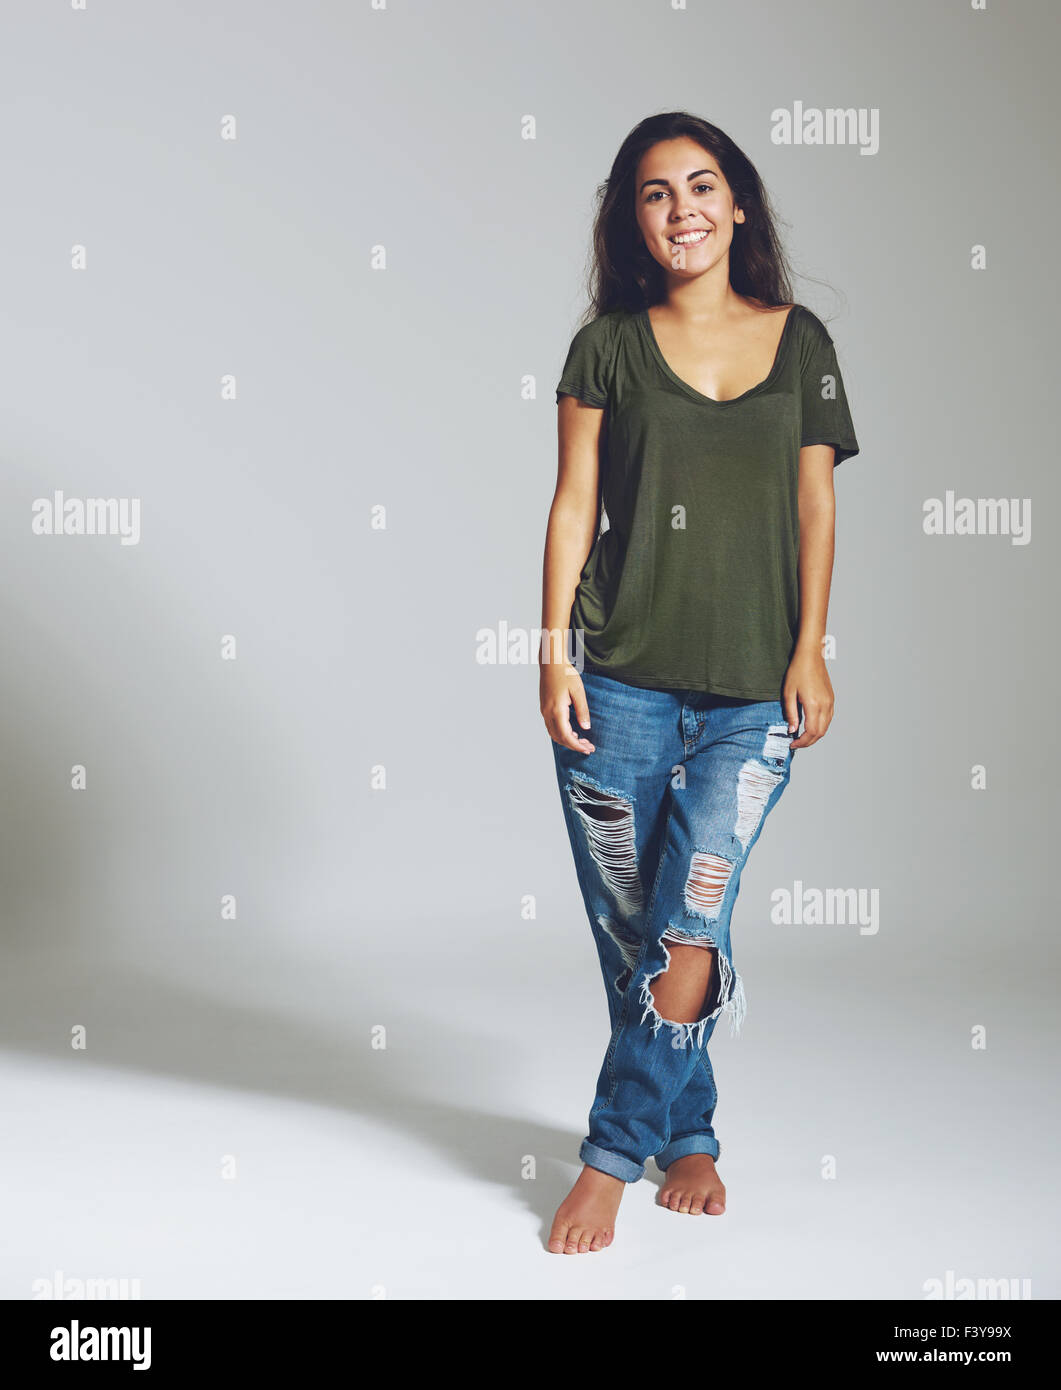 Full length portrait of a woman in jeans and a shirt. Isolated portrait Stock Photo